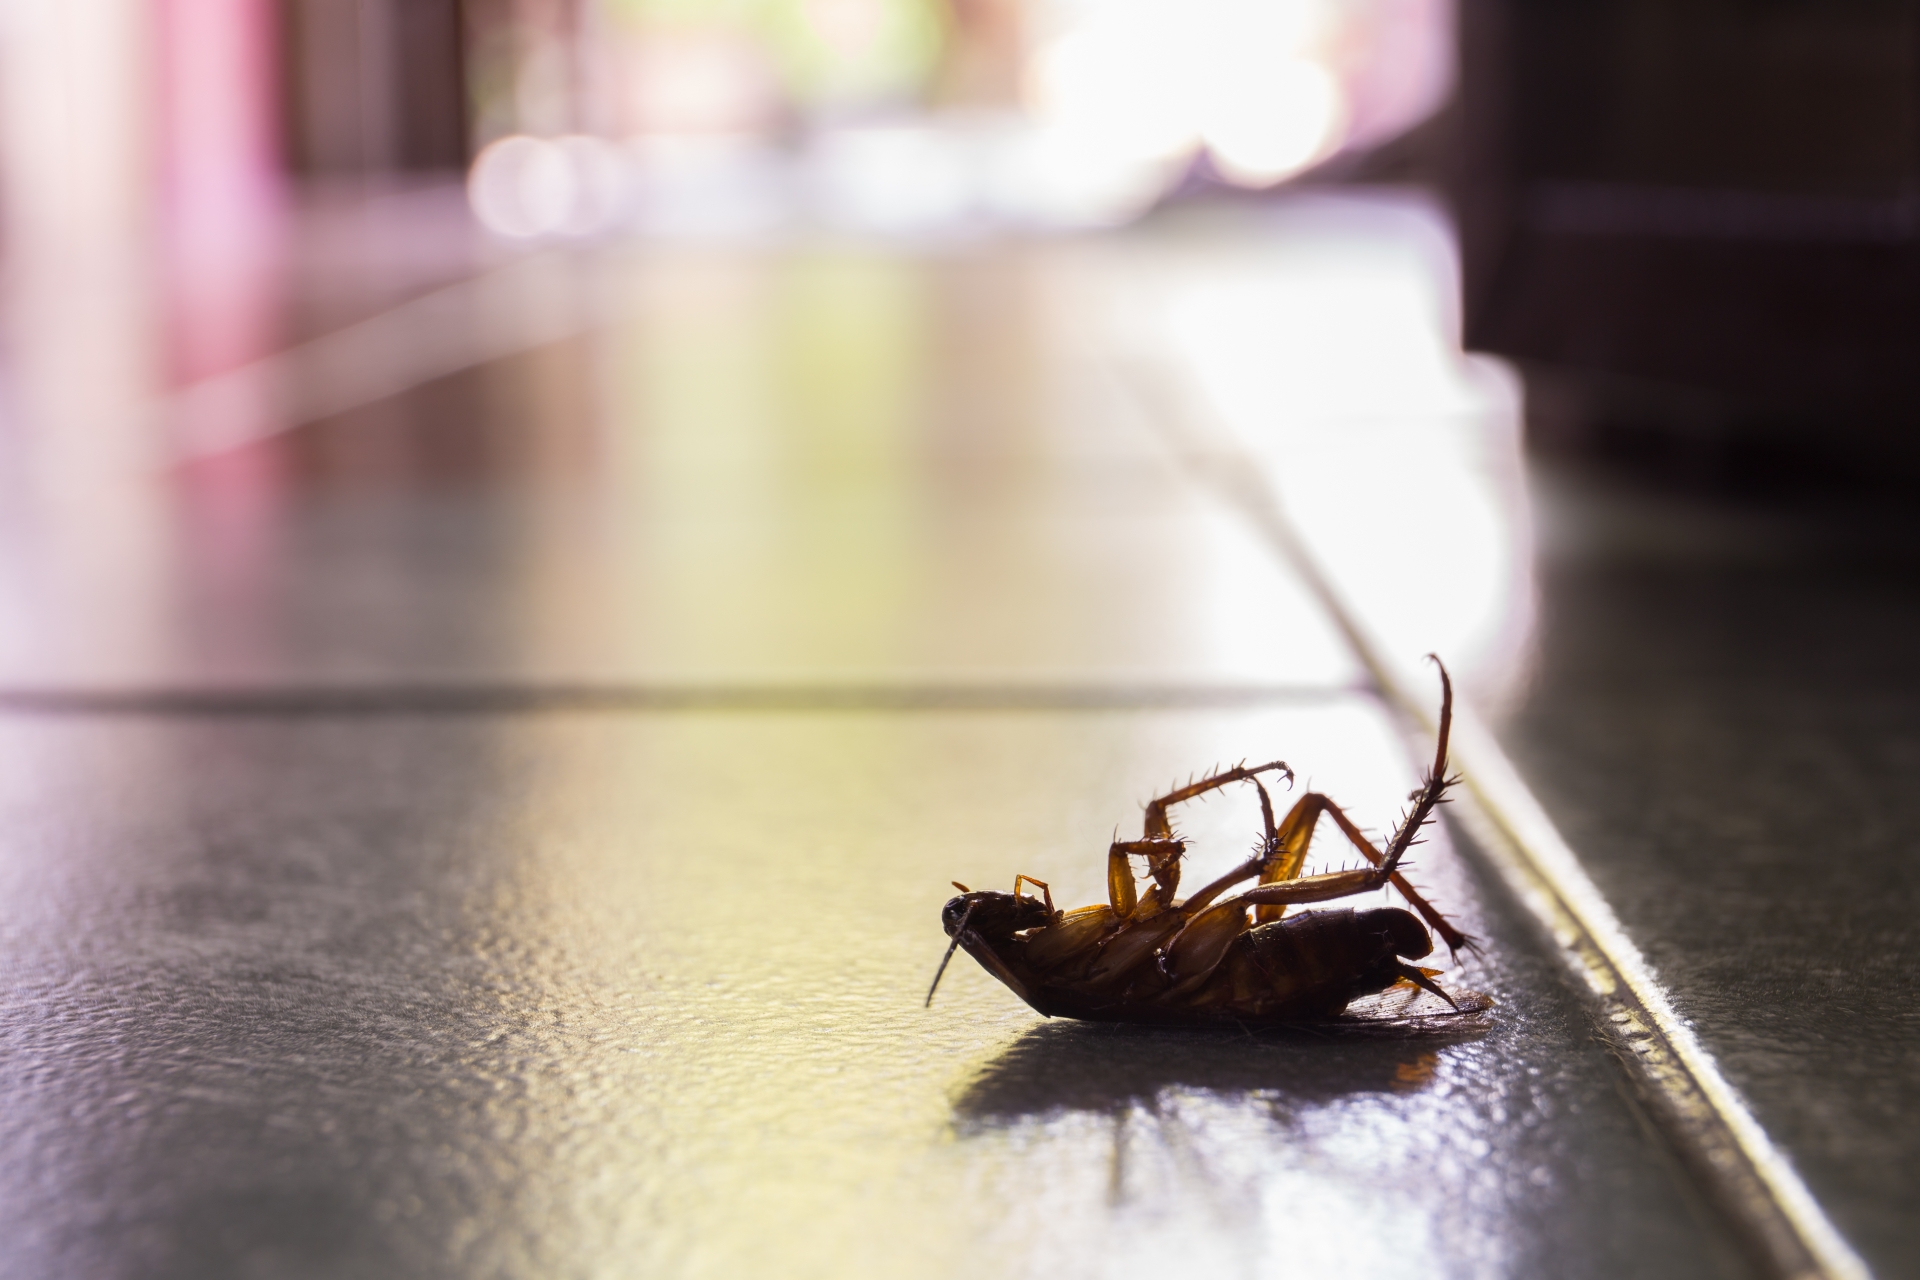 Cockroach Control, Pest Control in Deptford, SE8. Call Now 020 8166 9746